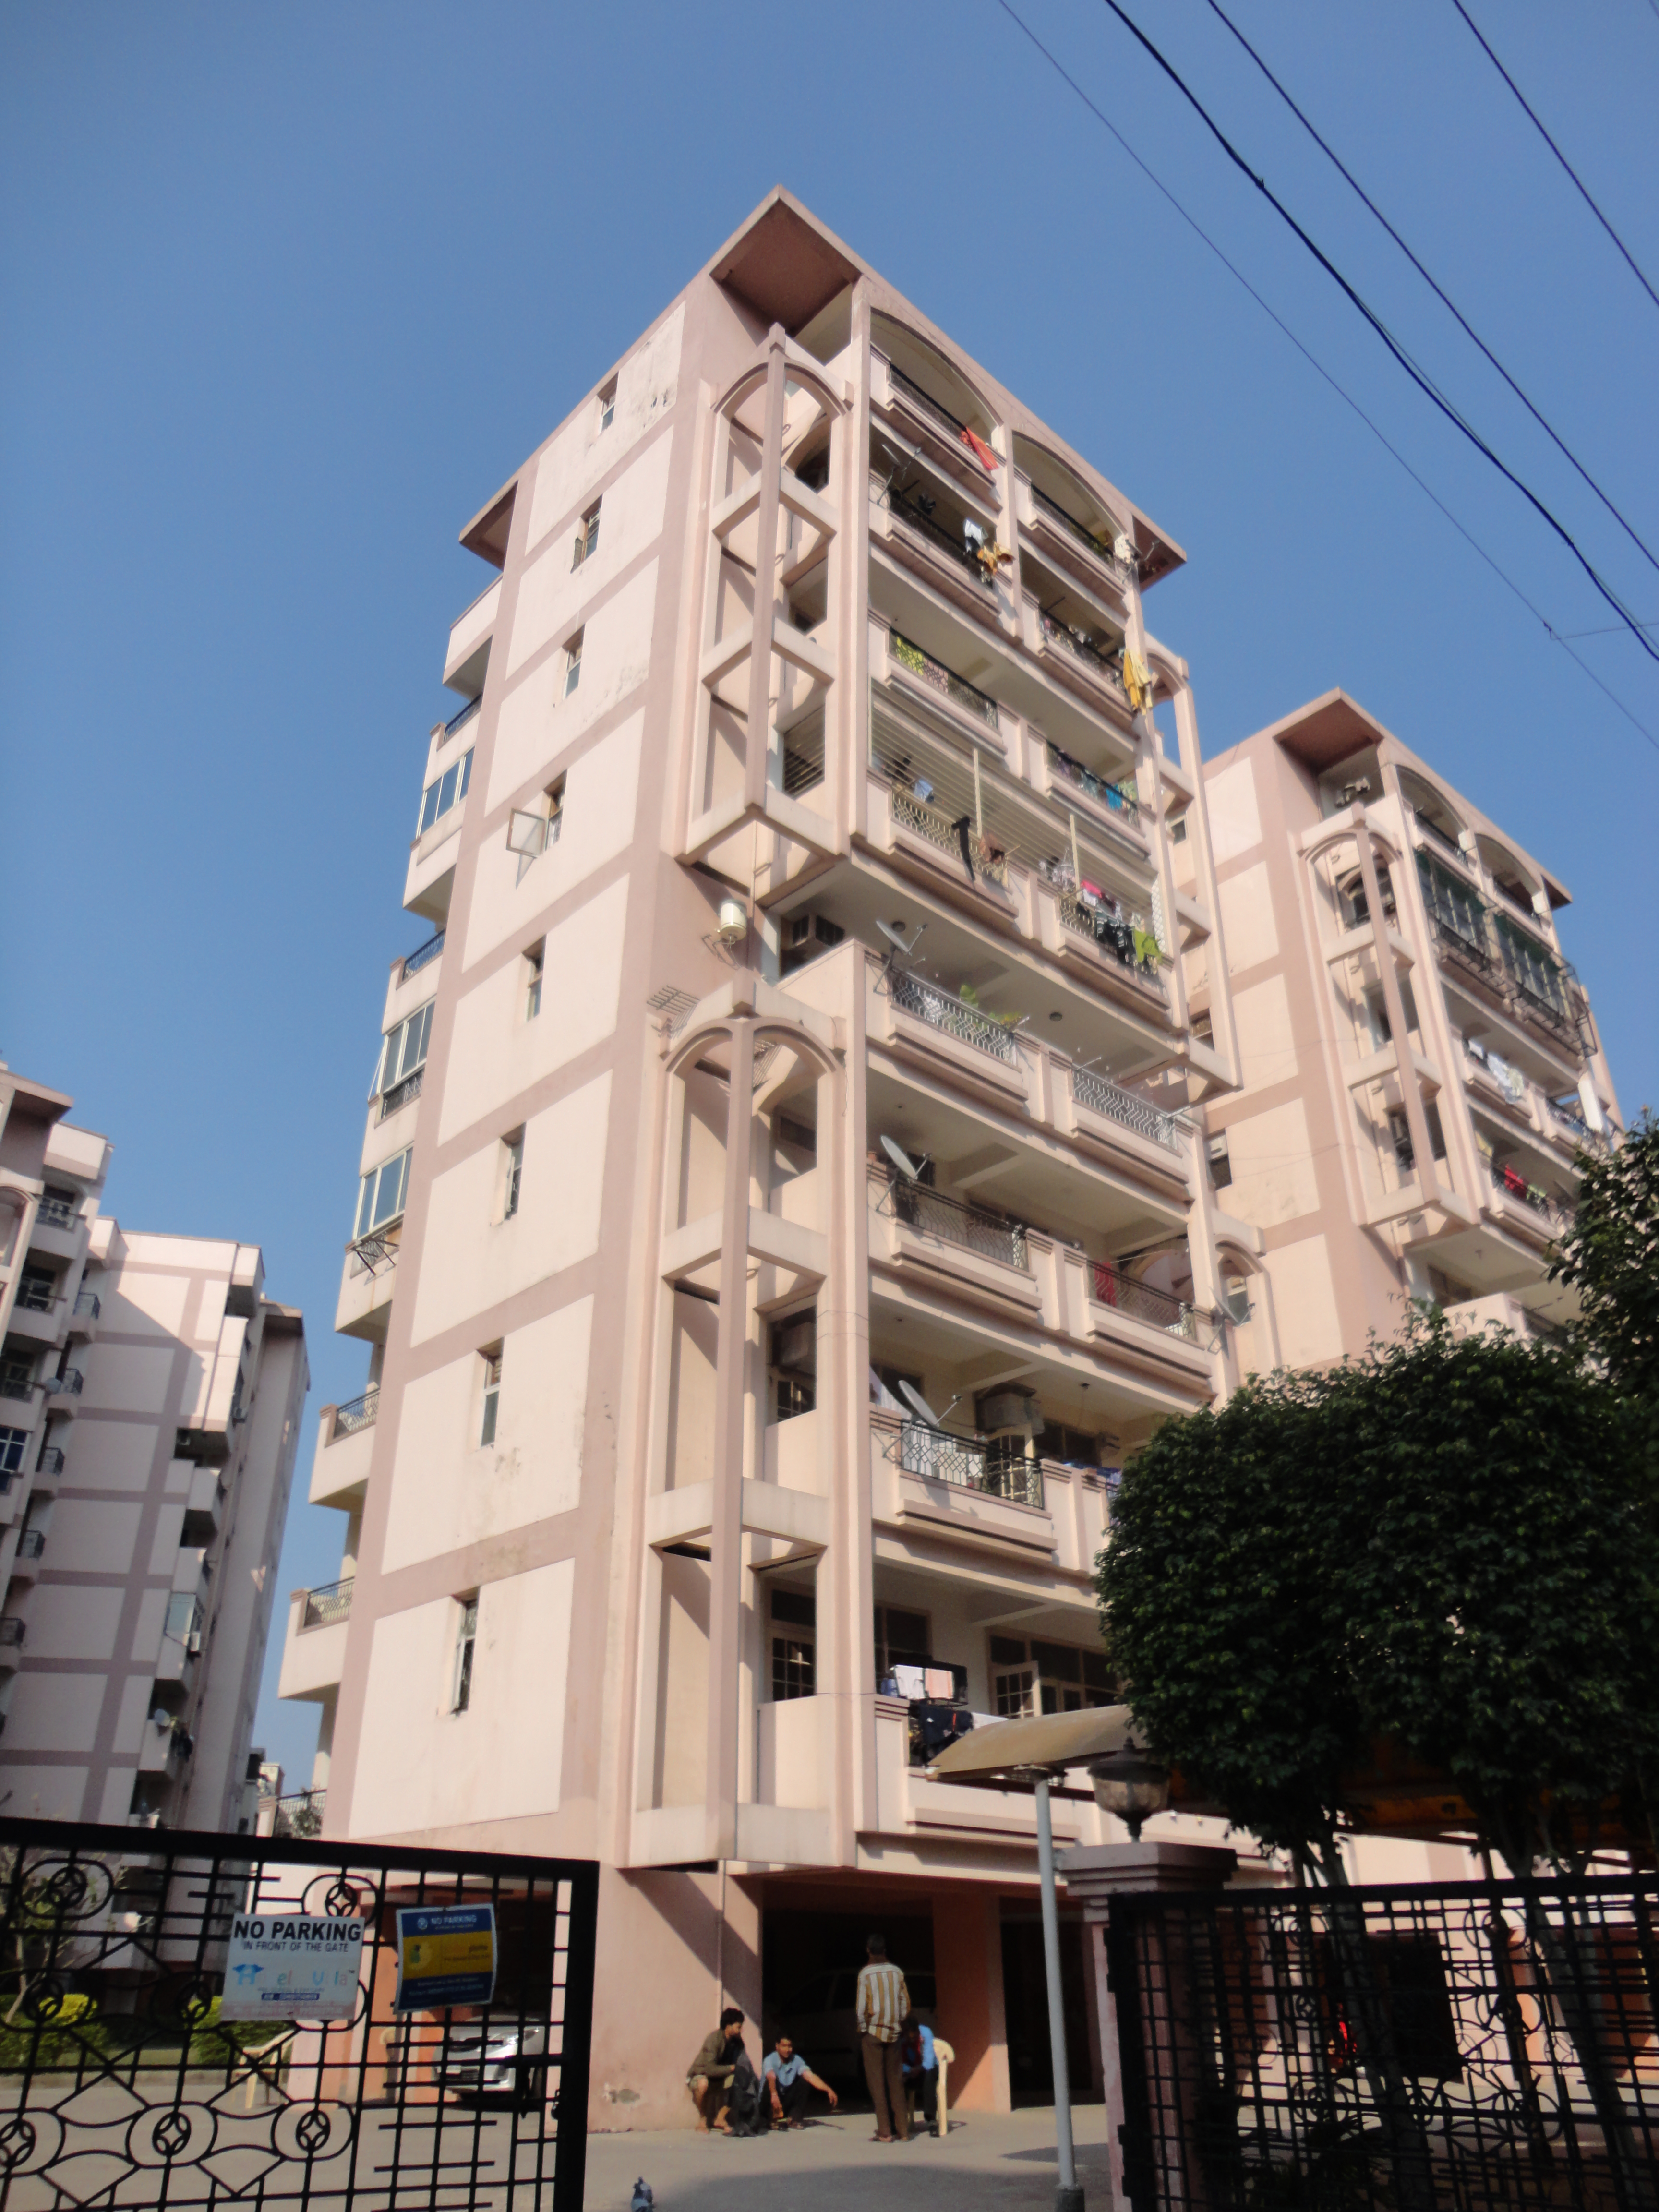 Swarn Jayanti Apartments CGHS Project Deails